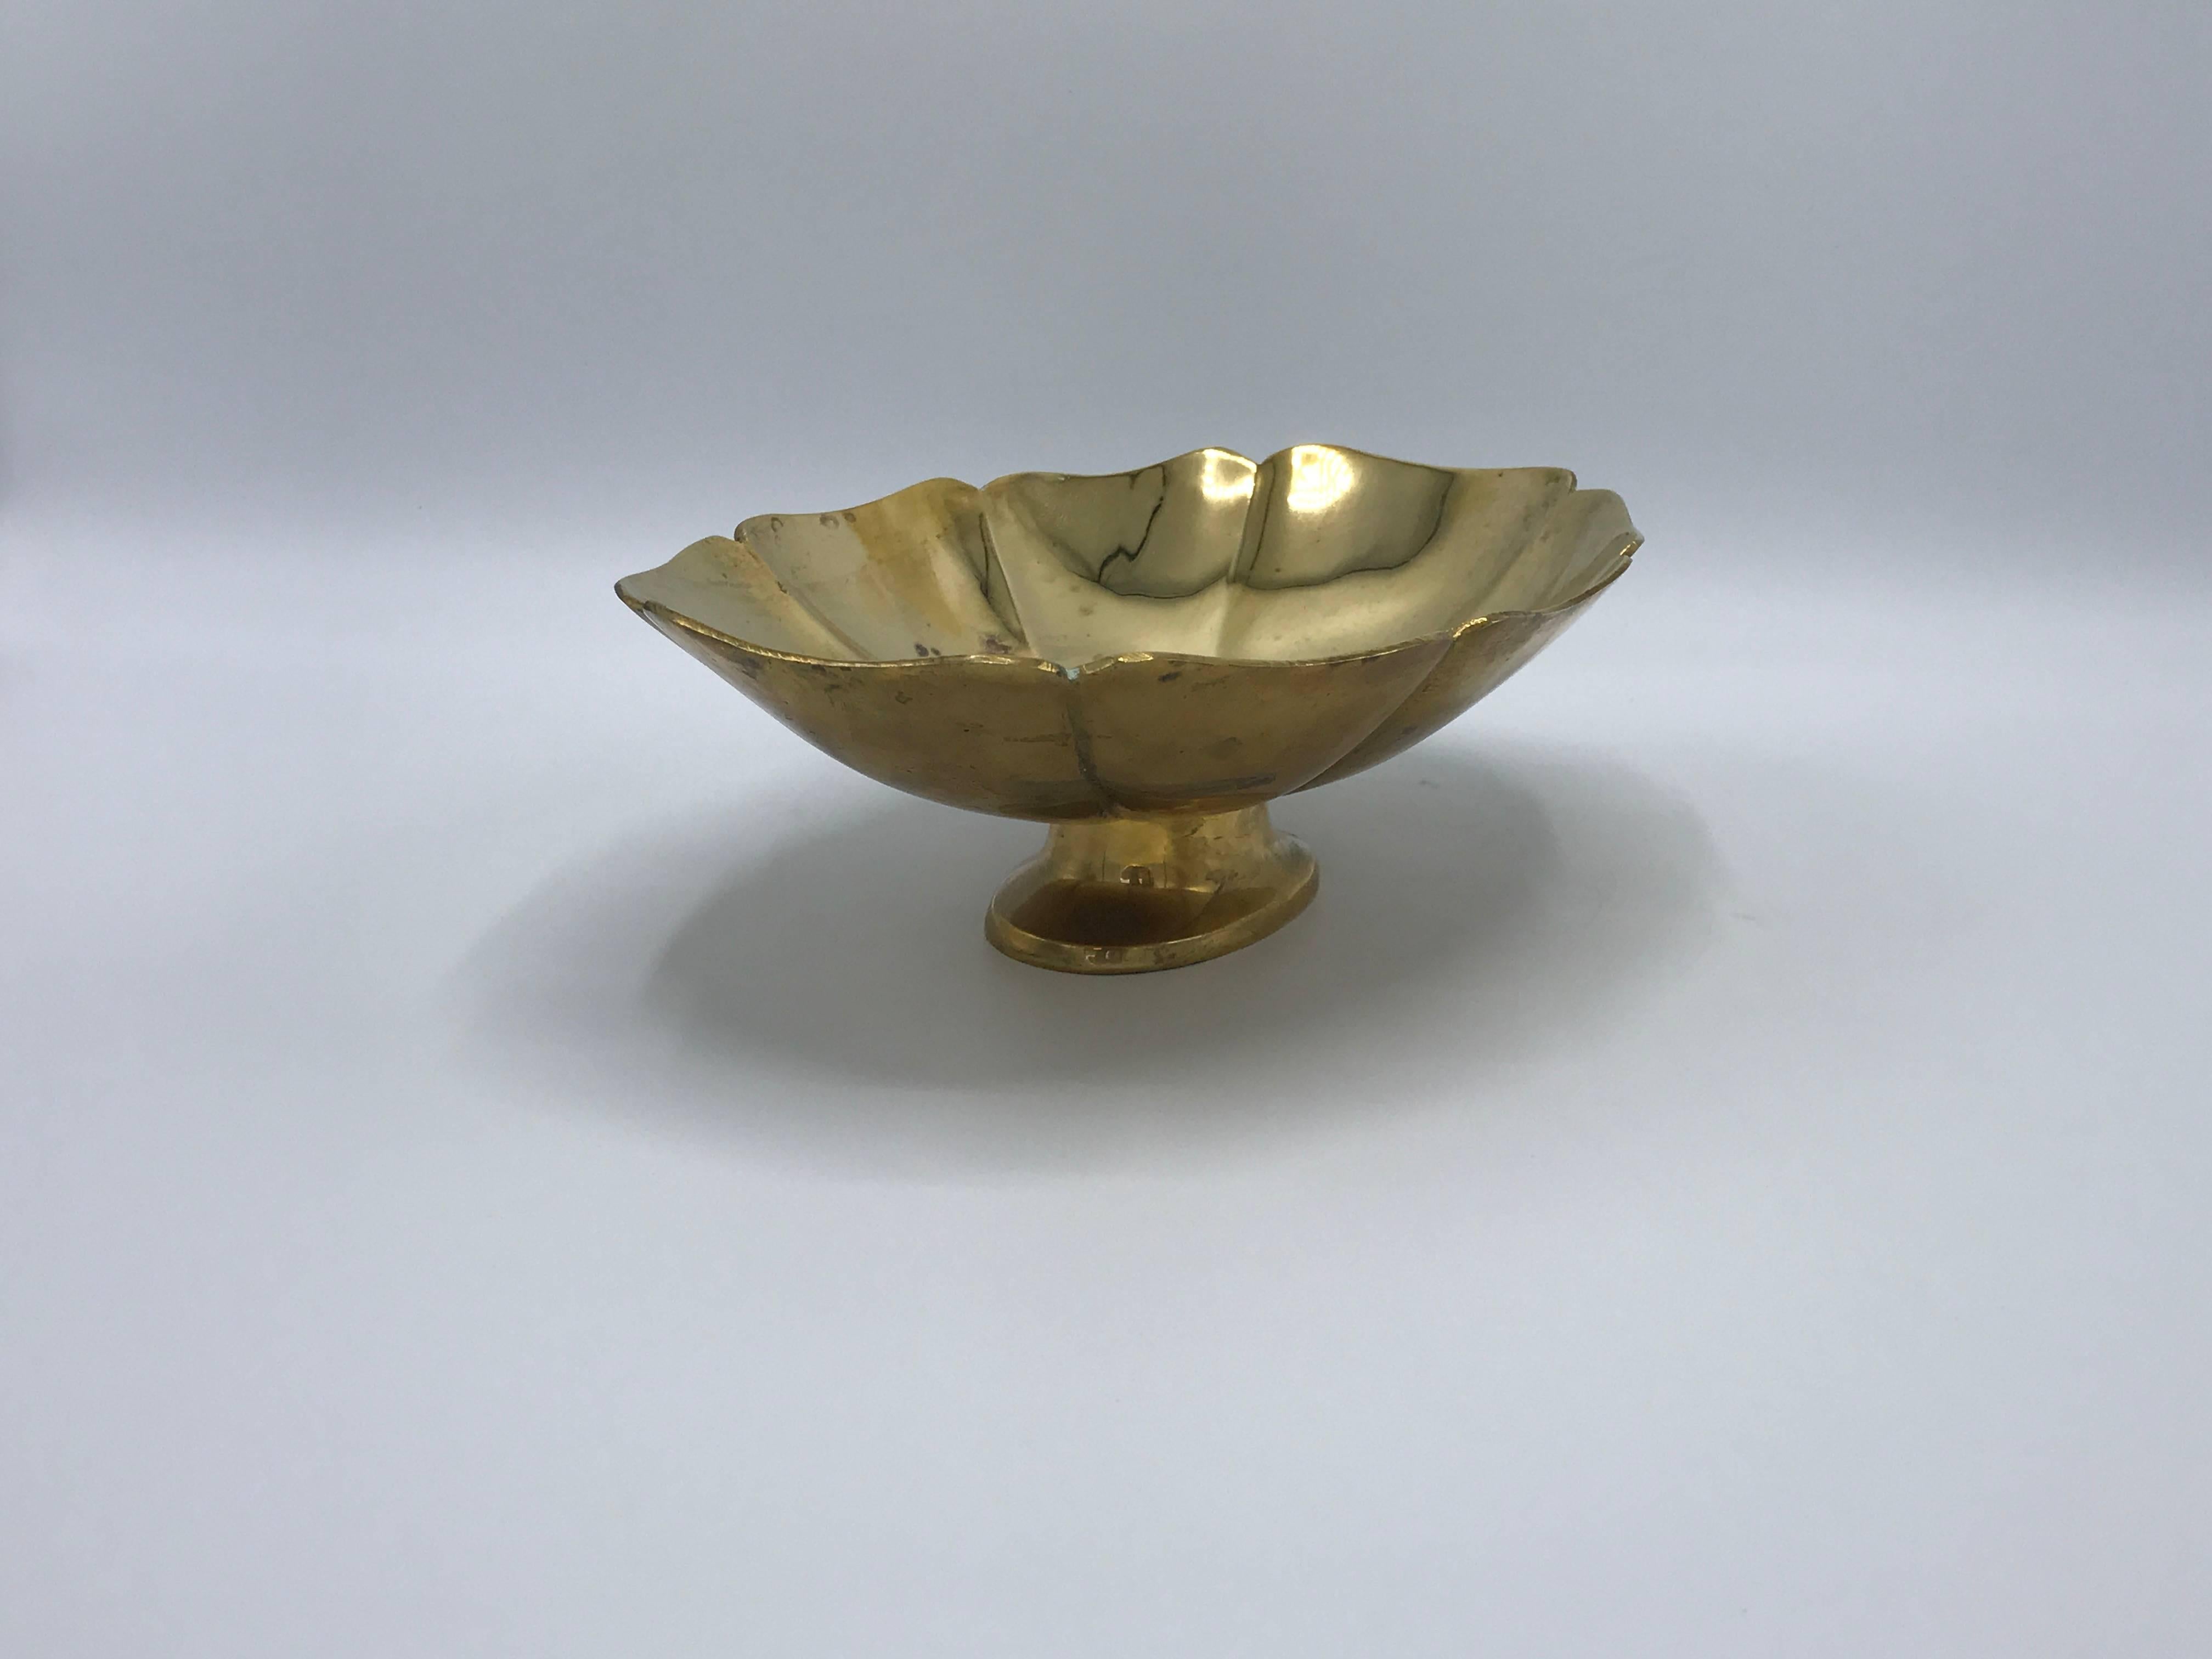 Offered is a beautiful, 1960s solid-brass scalloped bowl on a pedestal.